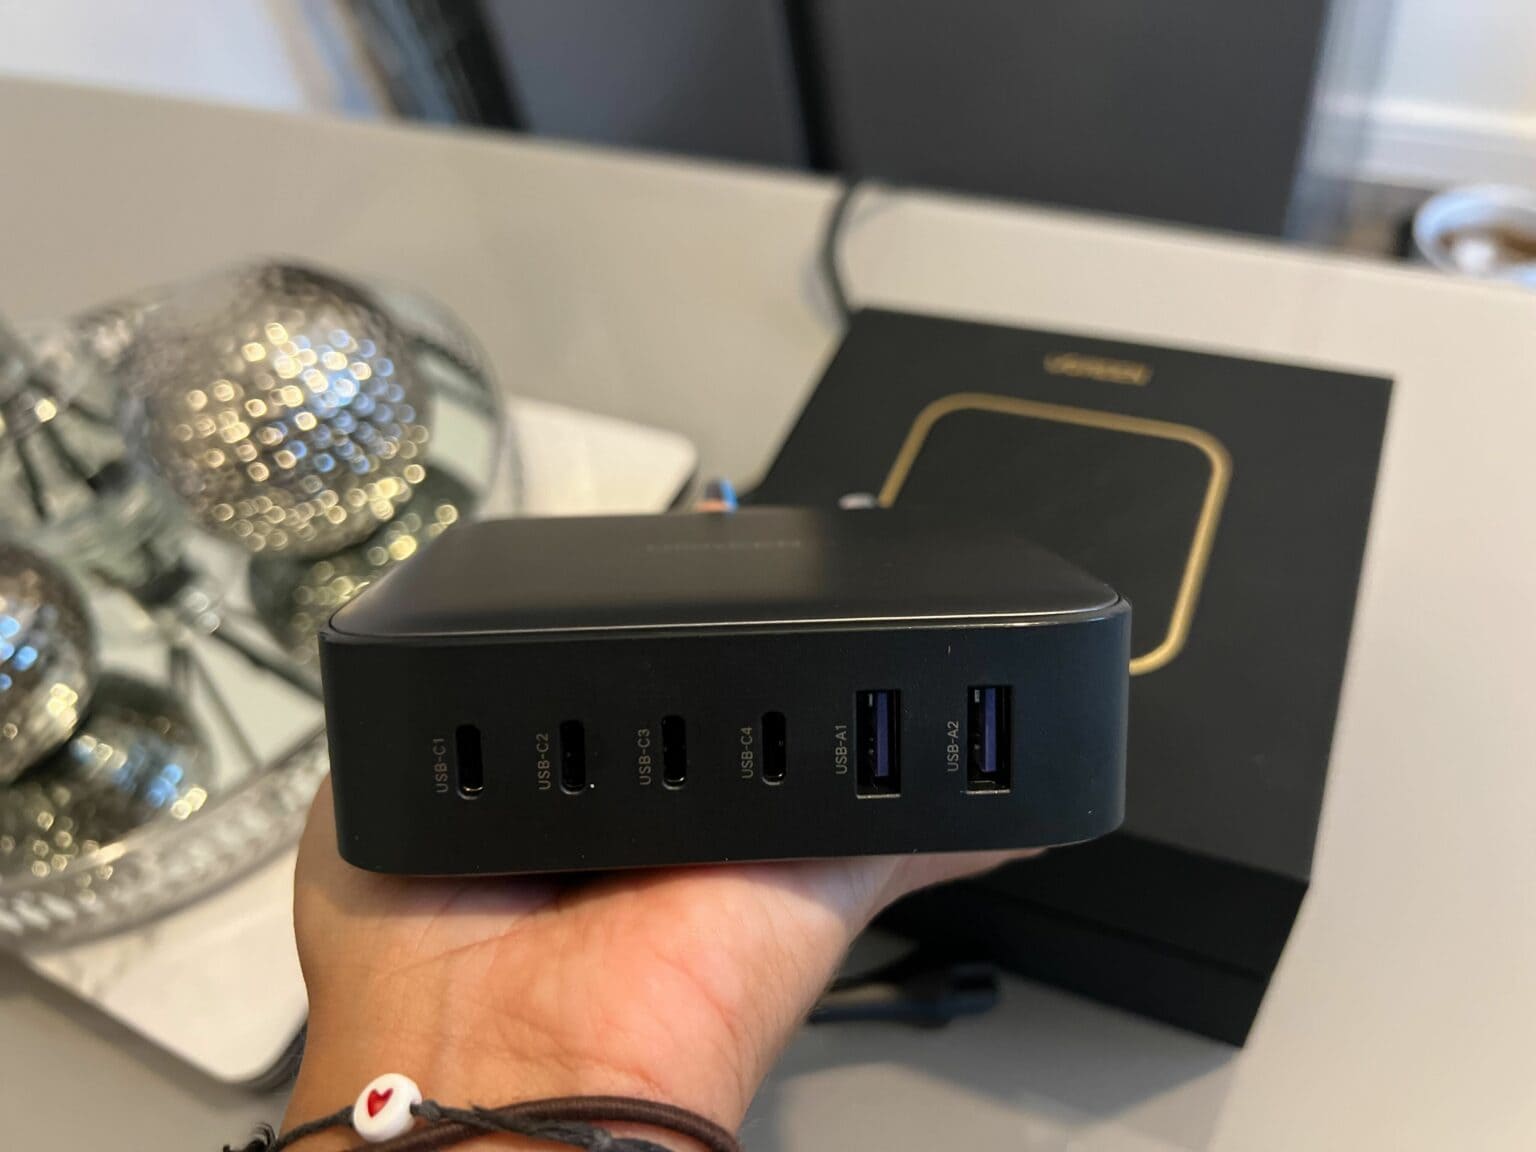 Four USB-C ports and two USB-A ports, all at your disposal.